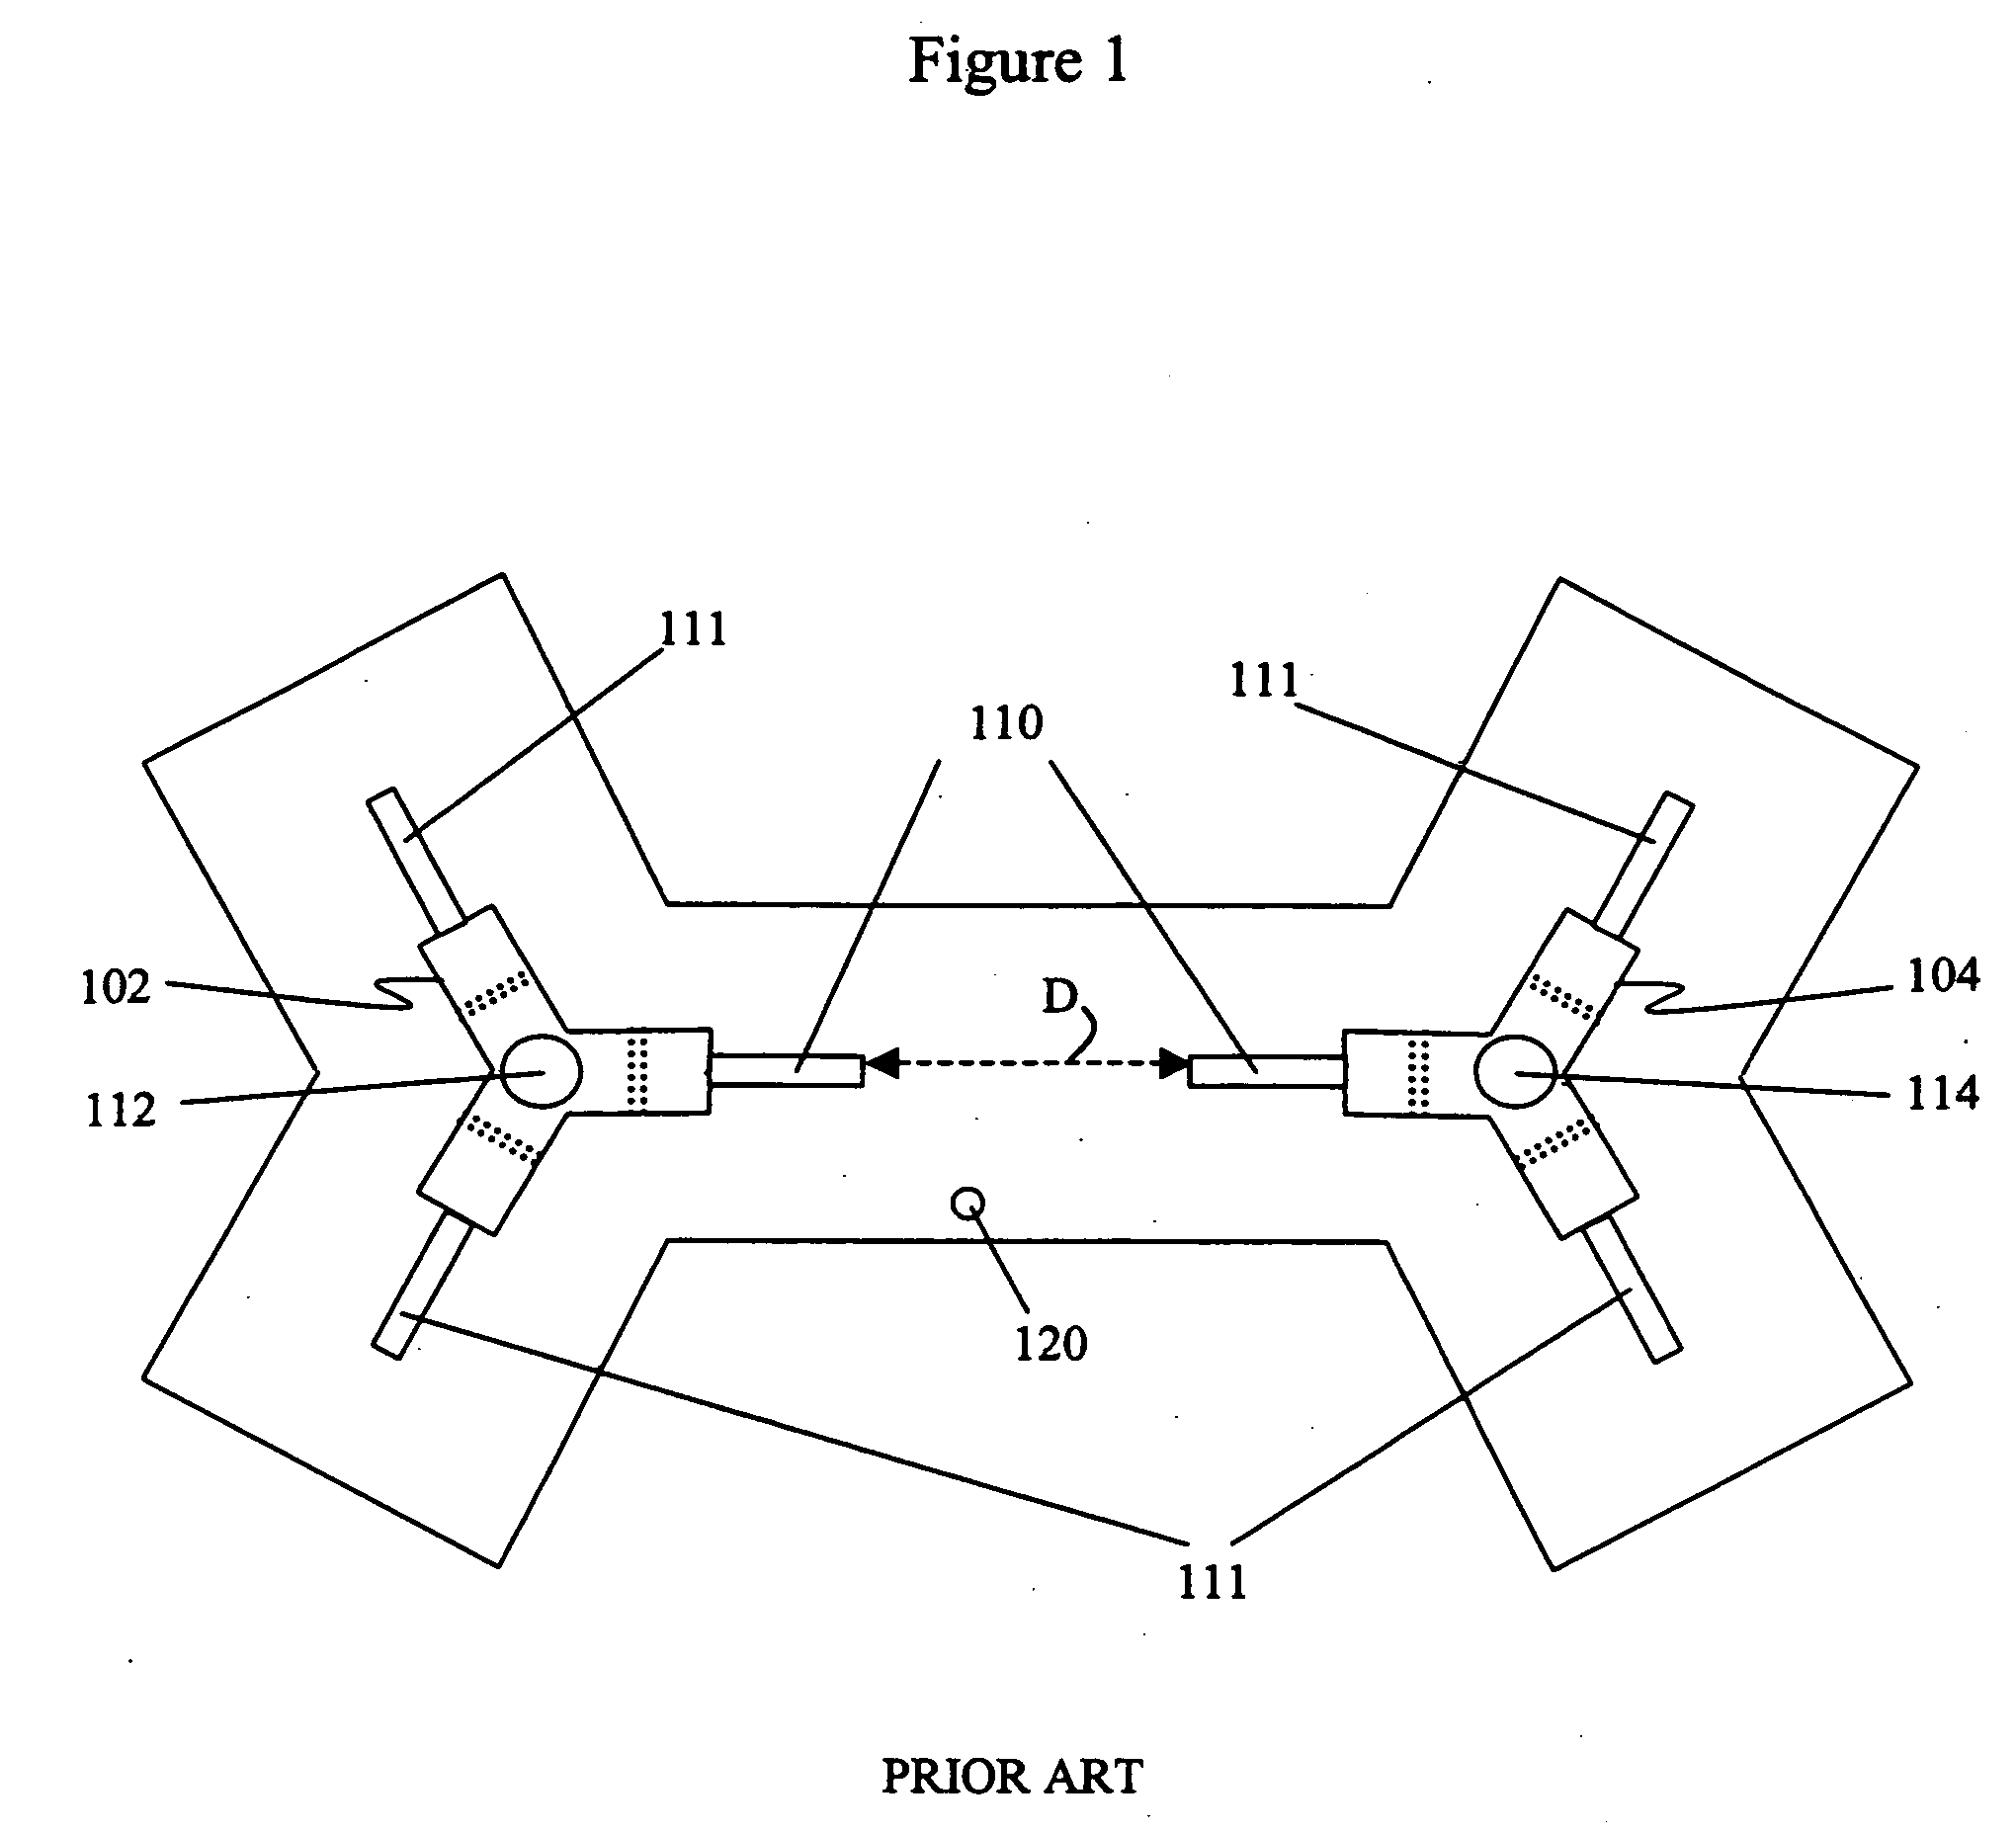 Multi-junction waveguide circulator without internal transitions